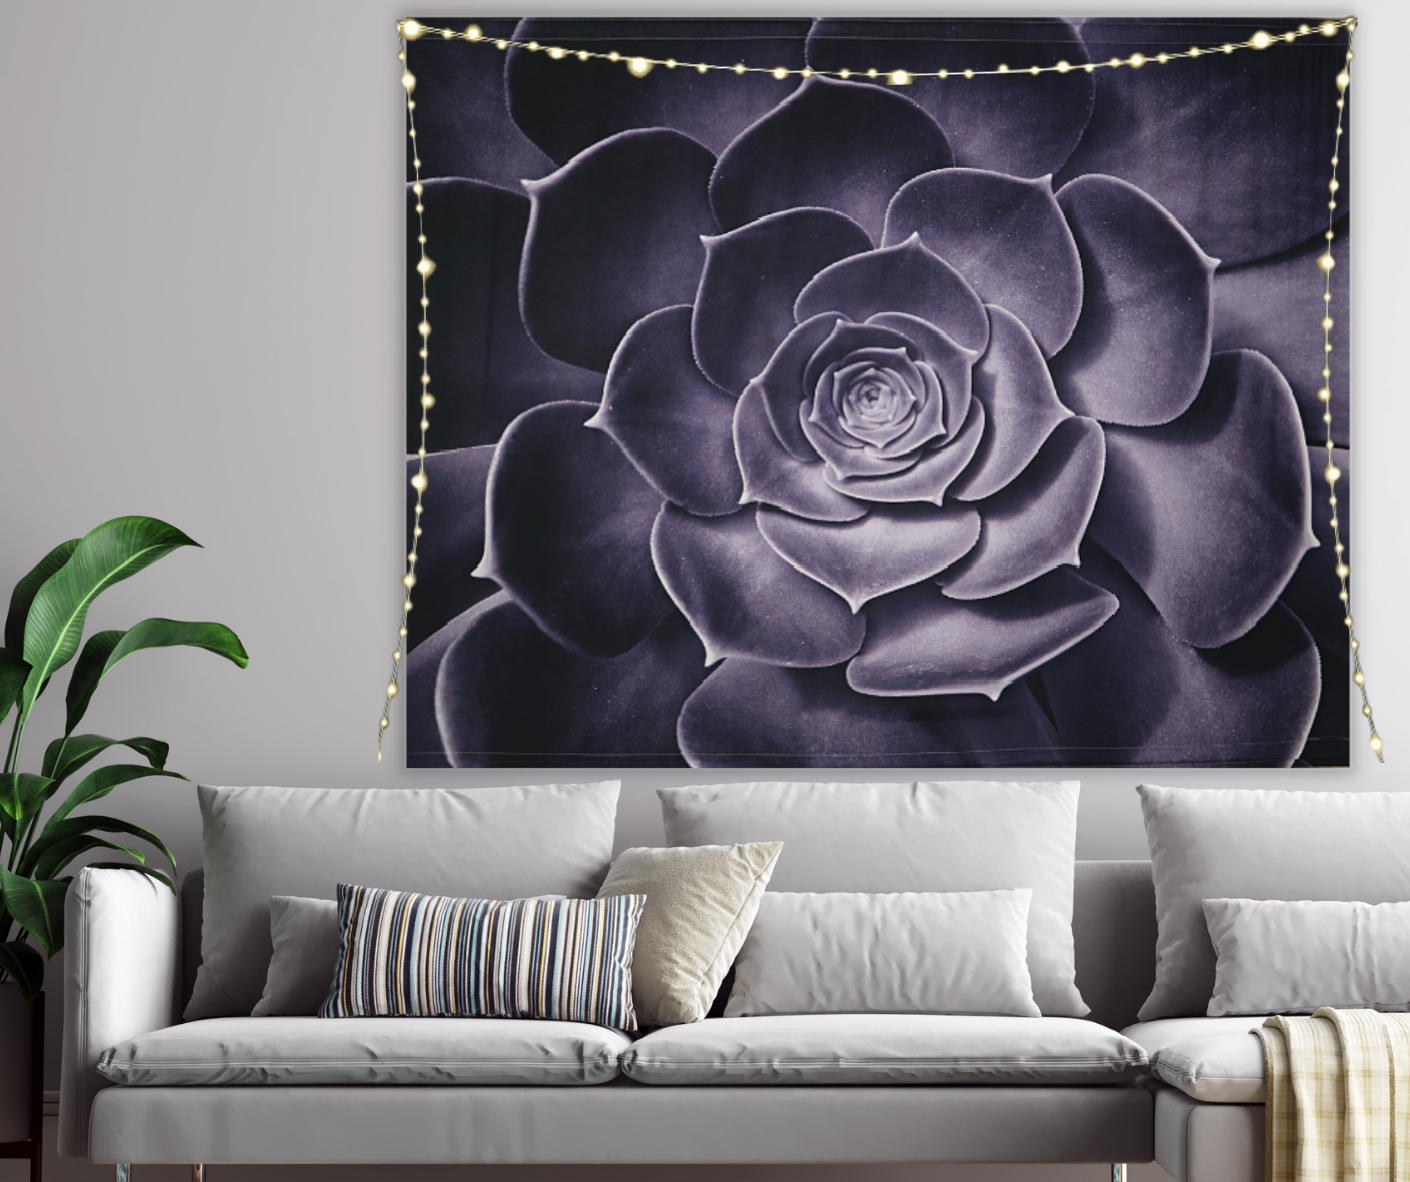 KaiSha LED Tapestry Wall Hanging; Bohemian Floral Wall Hanging Art Décor Large Purple Flower Artwork (79"x59")